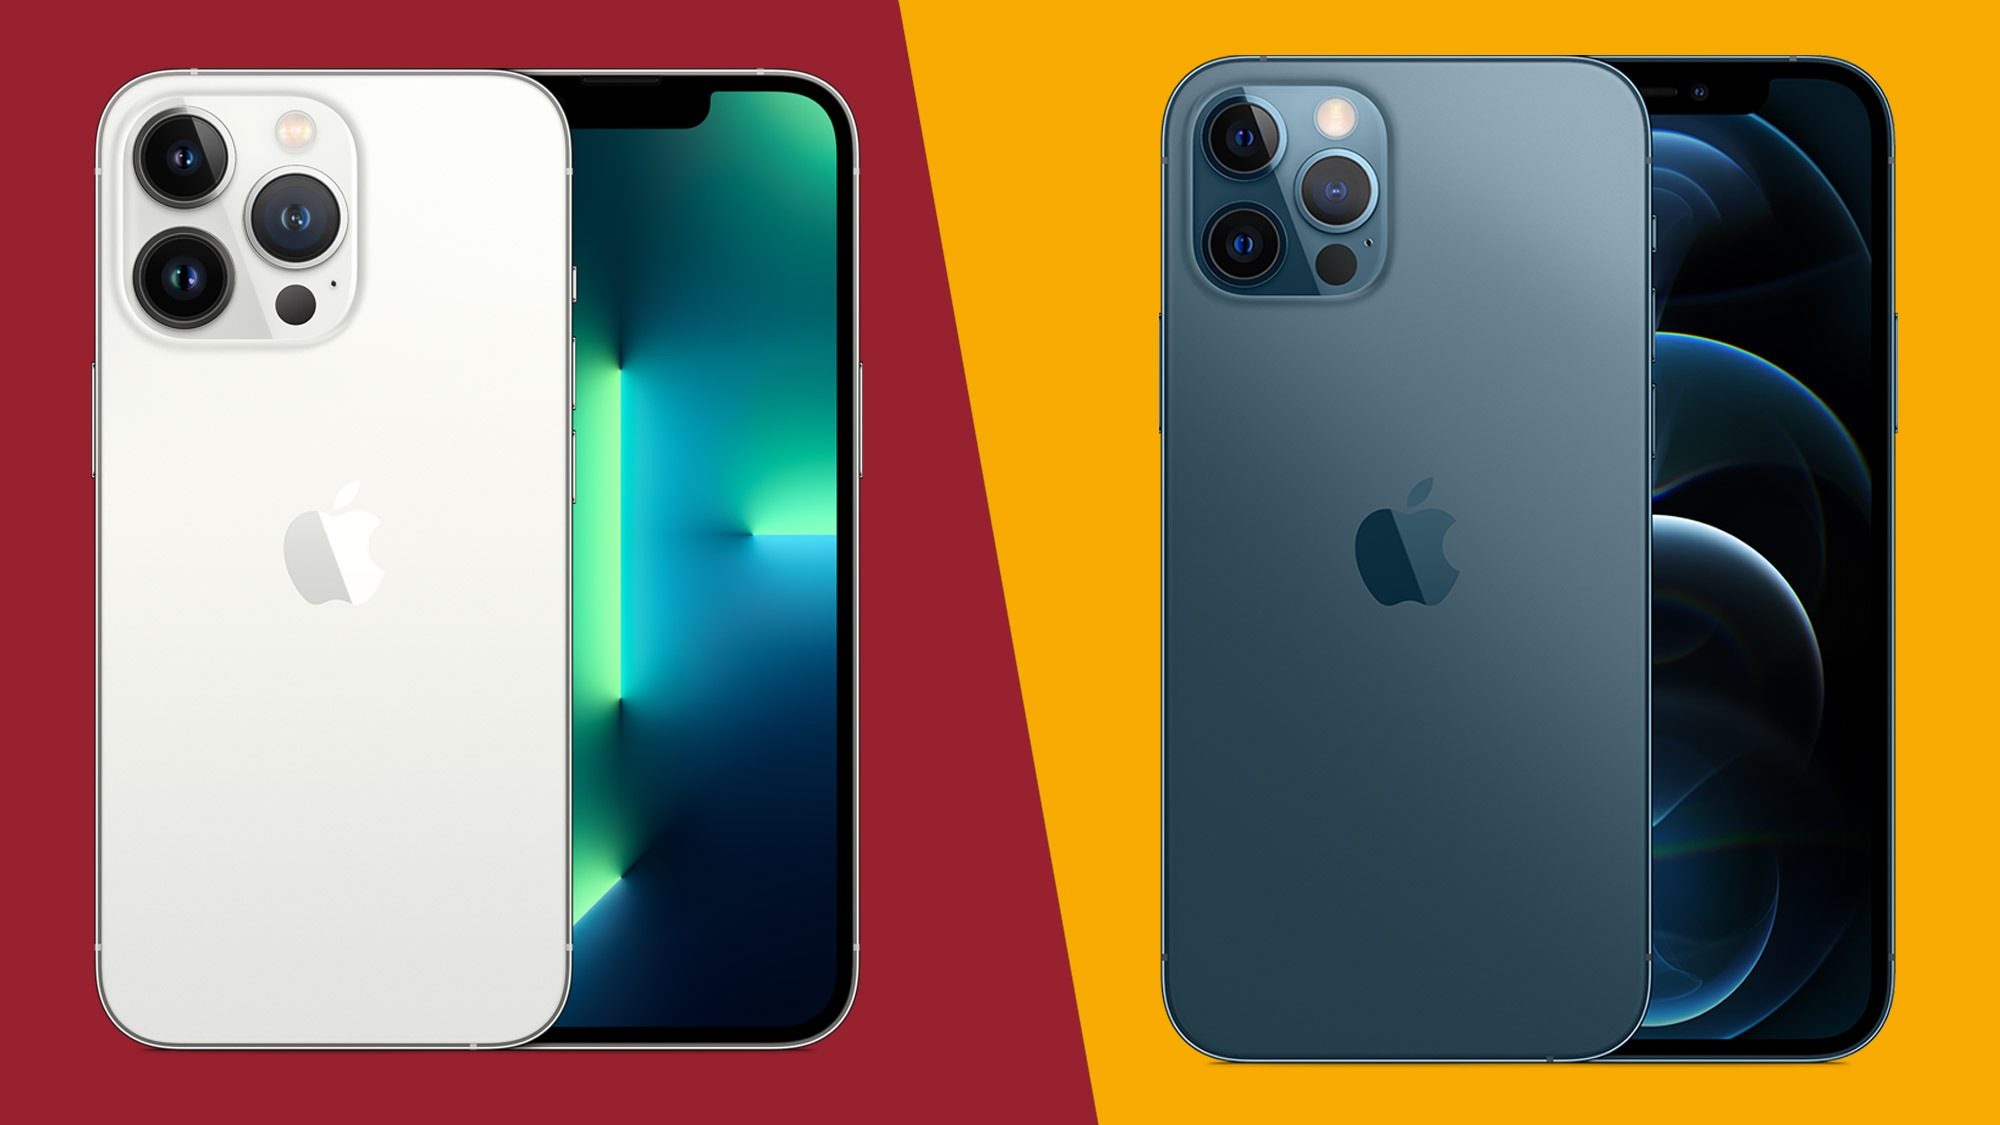 iPhone 12 vs. iPhone 13: Which should you buy in 2022? - 9to5Mac